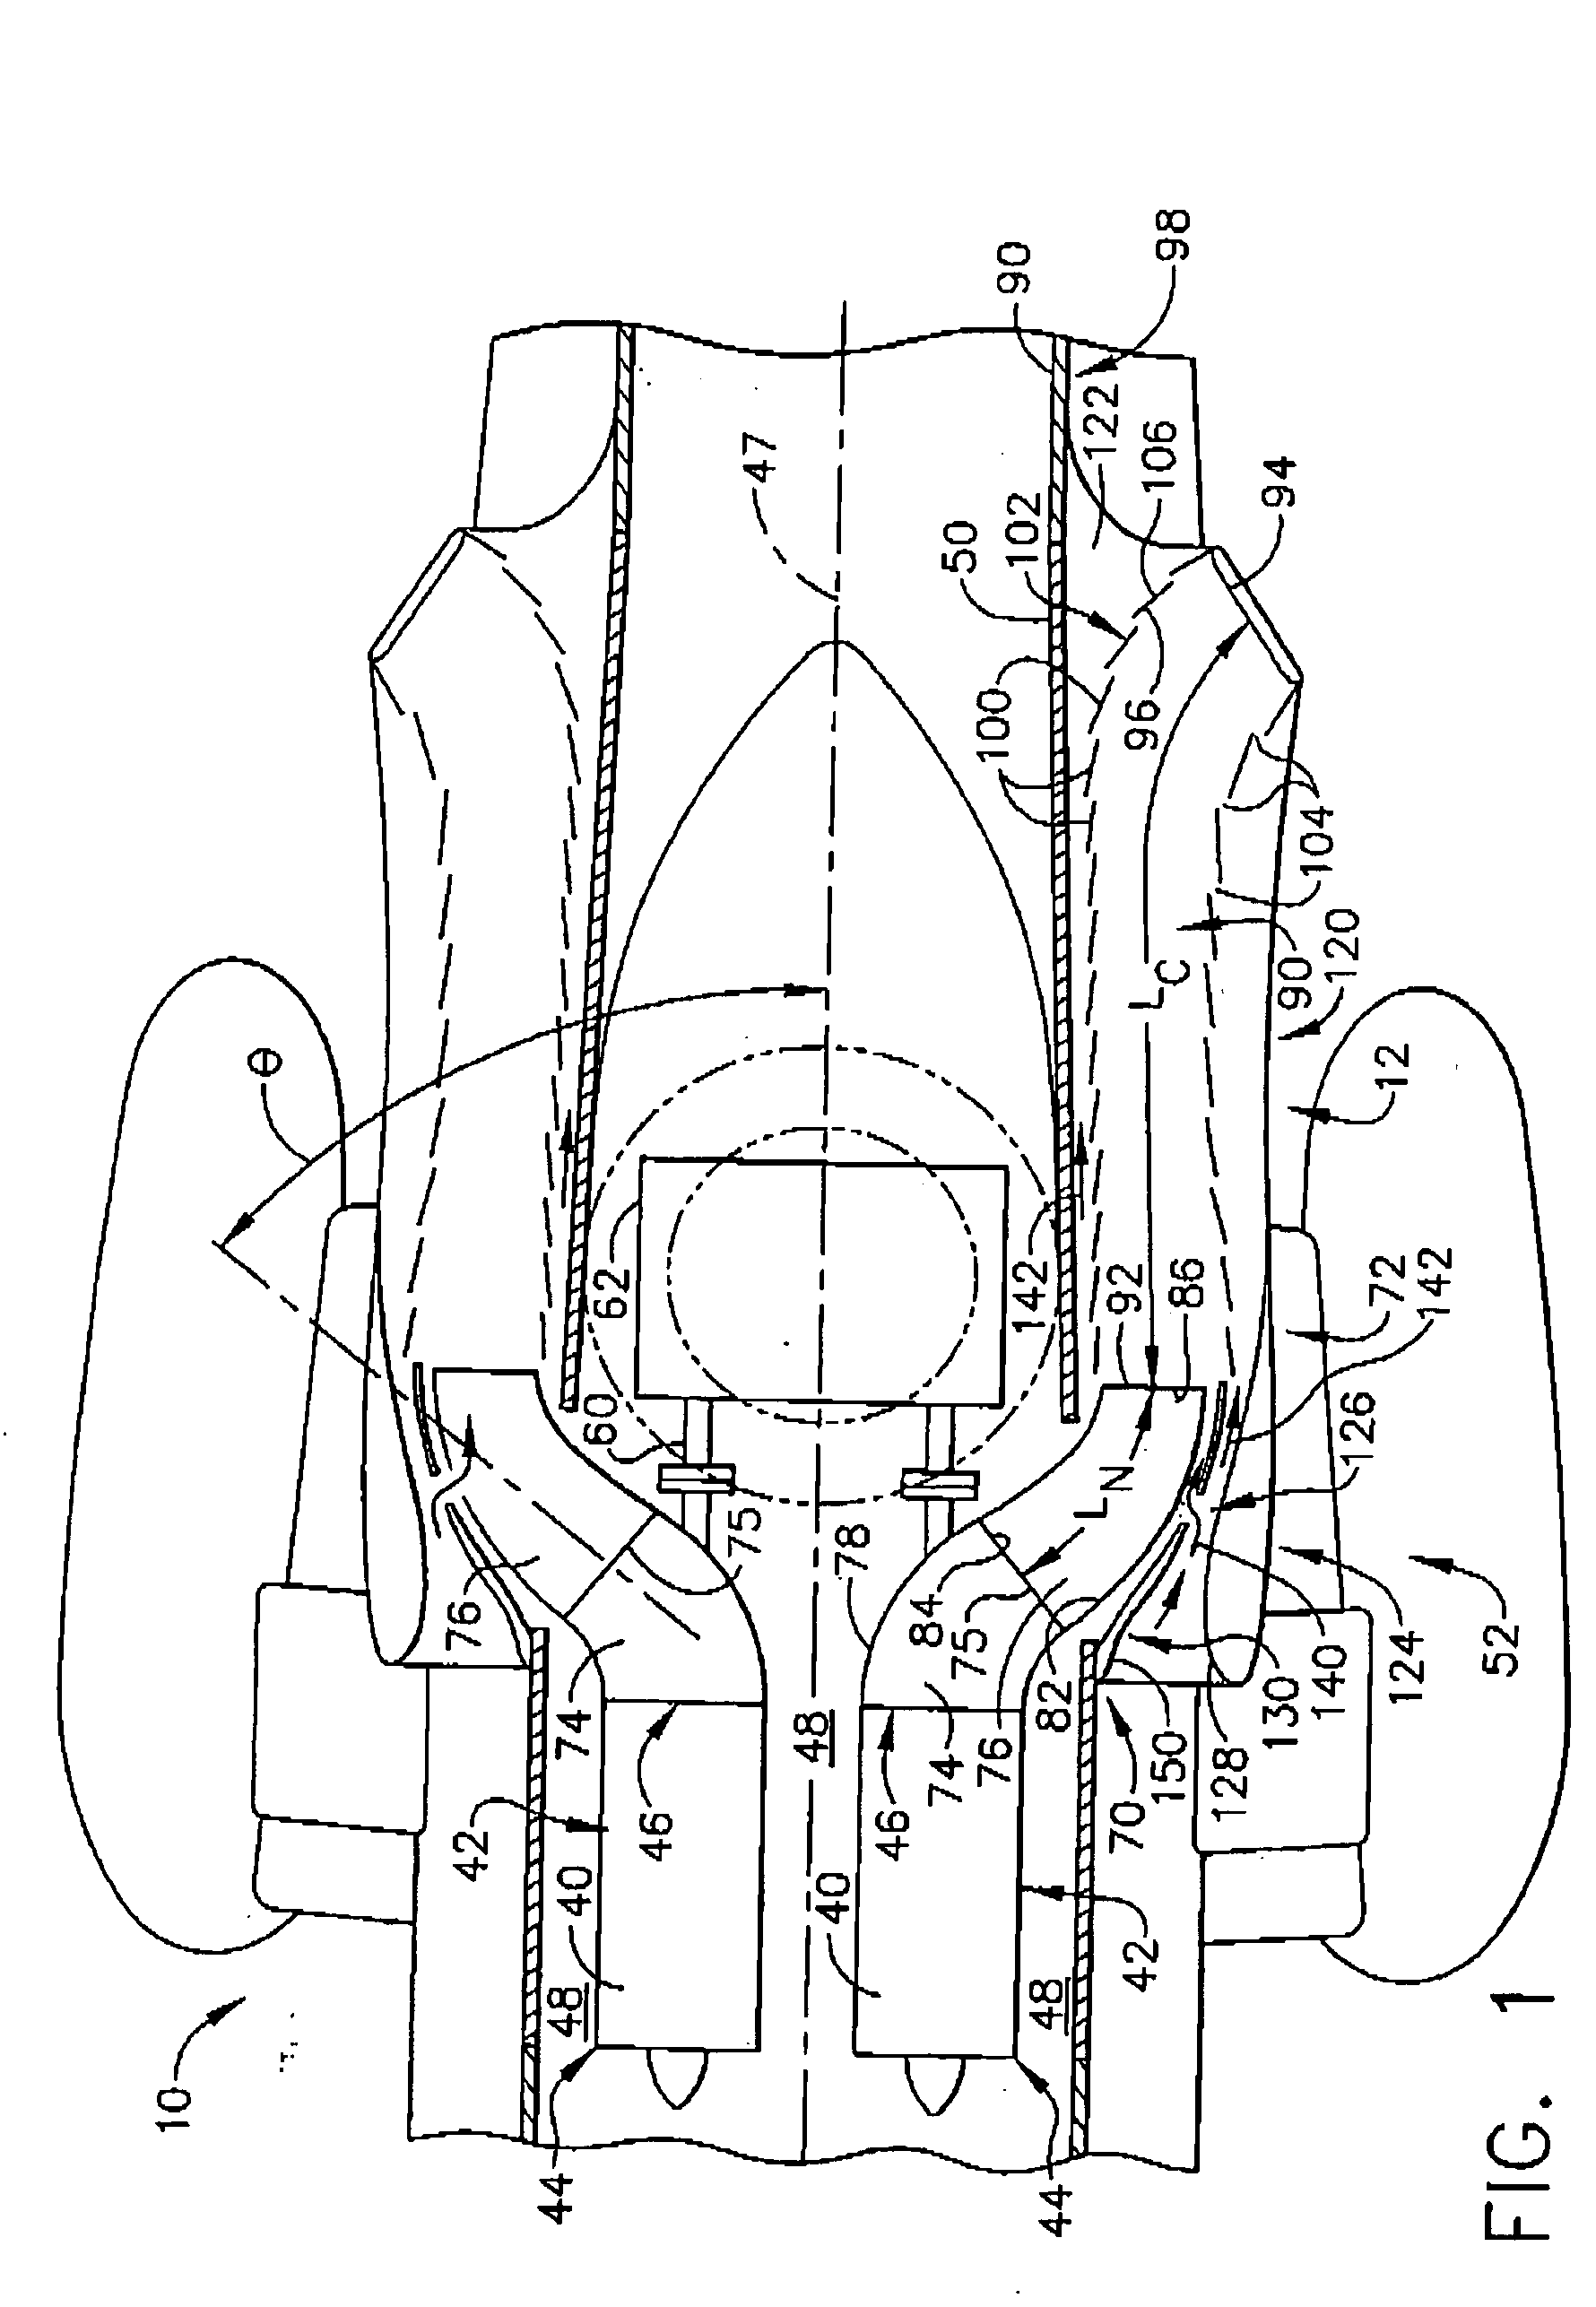 Methods and apparatus for exhausting gases from gas turbine engines